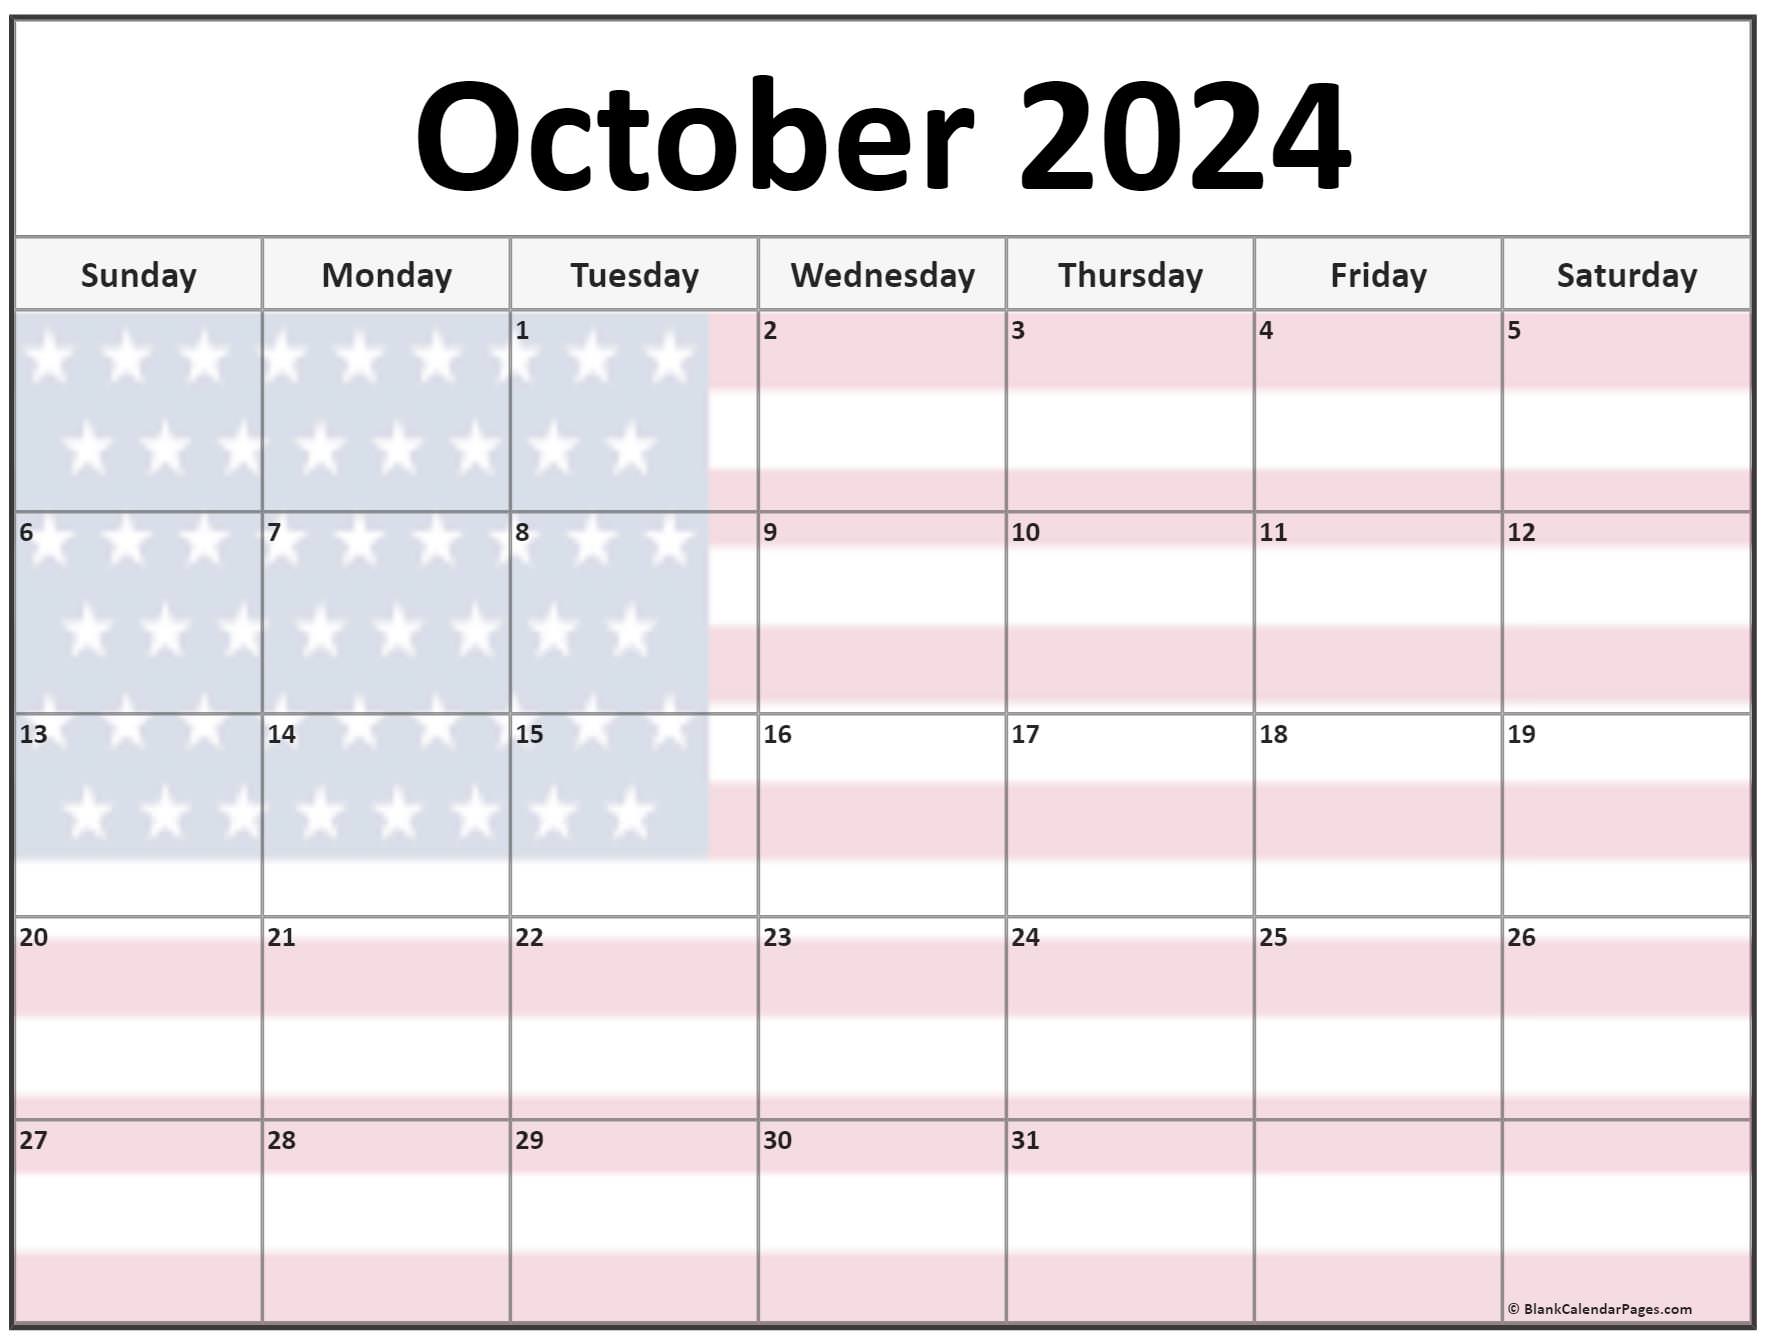 Collection of October 2024 photo calendars with image filters.